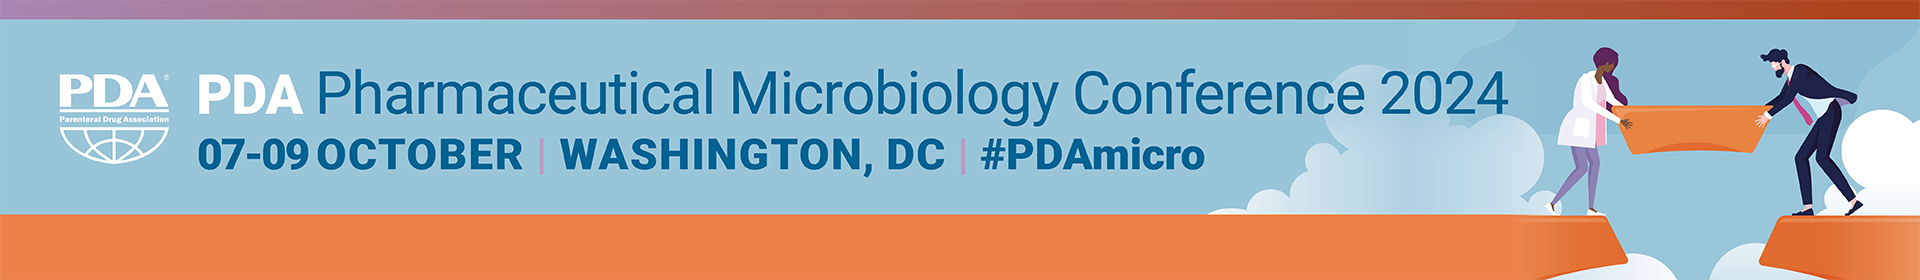 PDA Pharmaceutical Microbiology Conference 2024 Event Banner